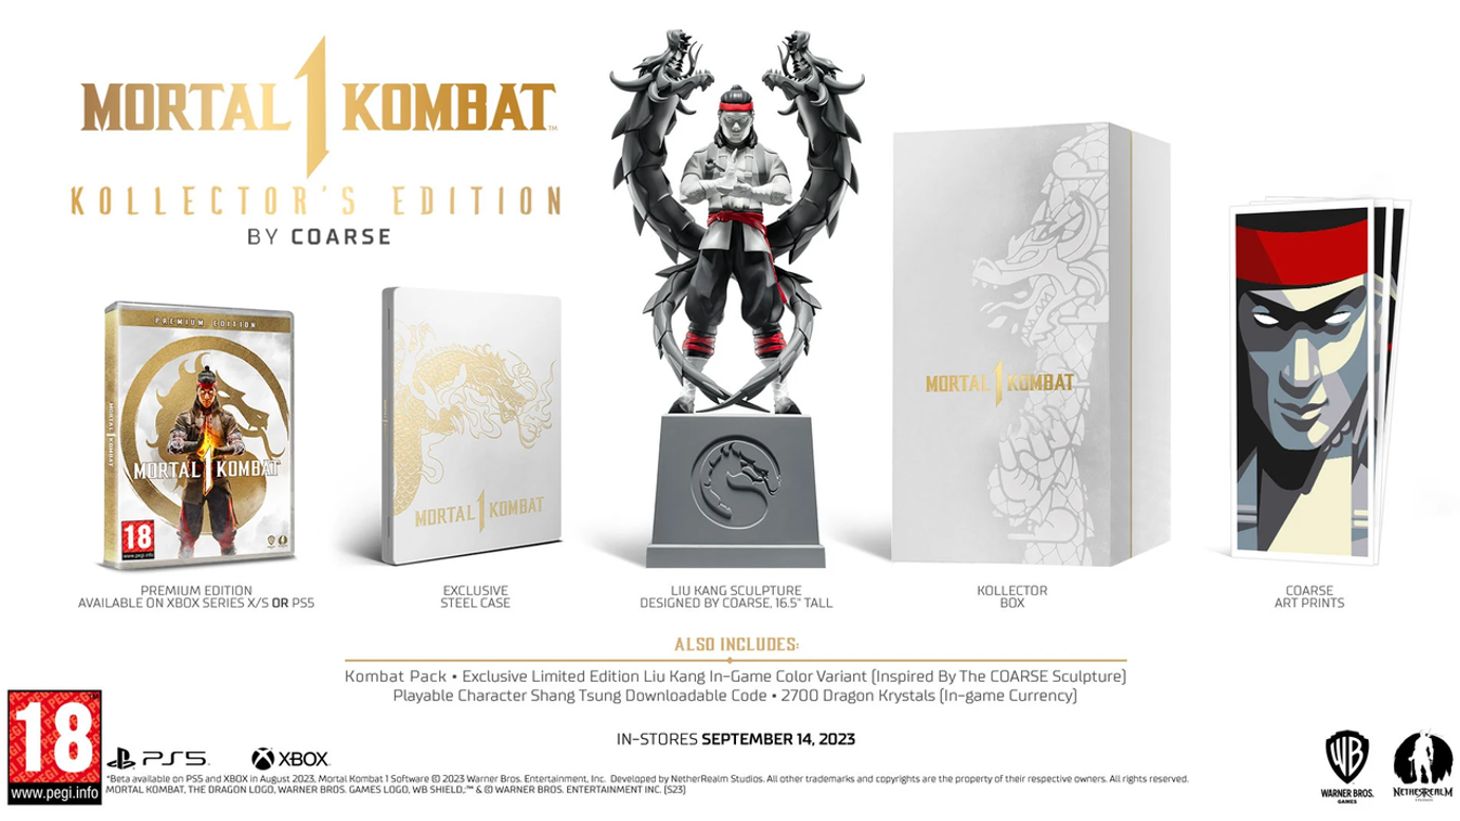 Mortal Kombat 1 Pre-order: The Kollector's Edition can be seen